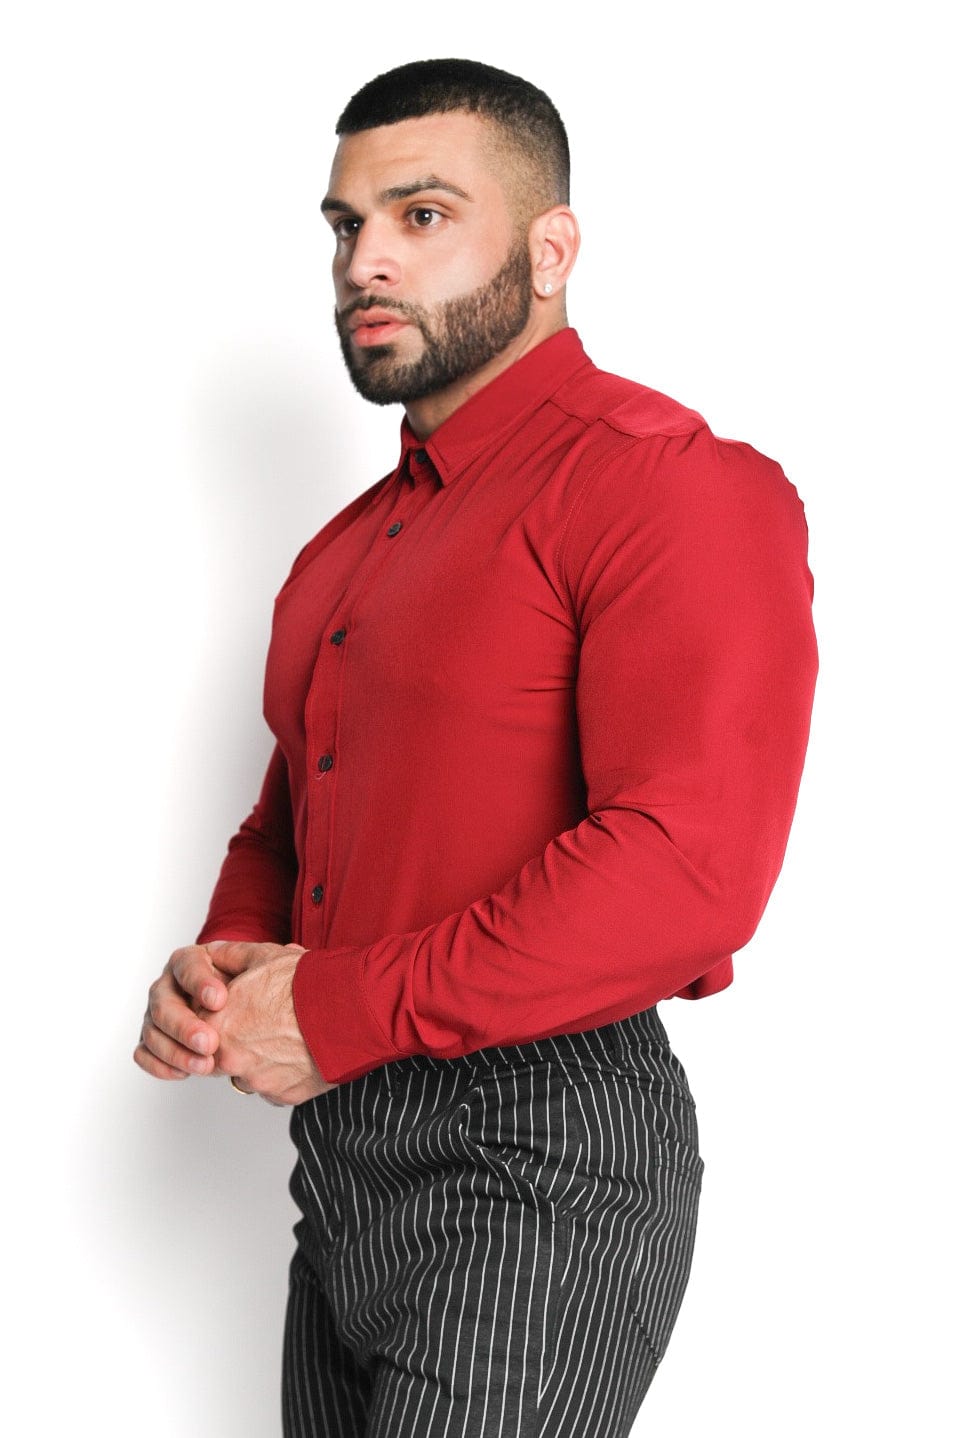 Mens Red Checkered Dress Pants